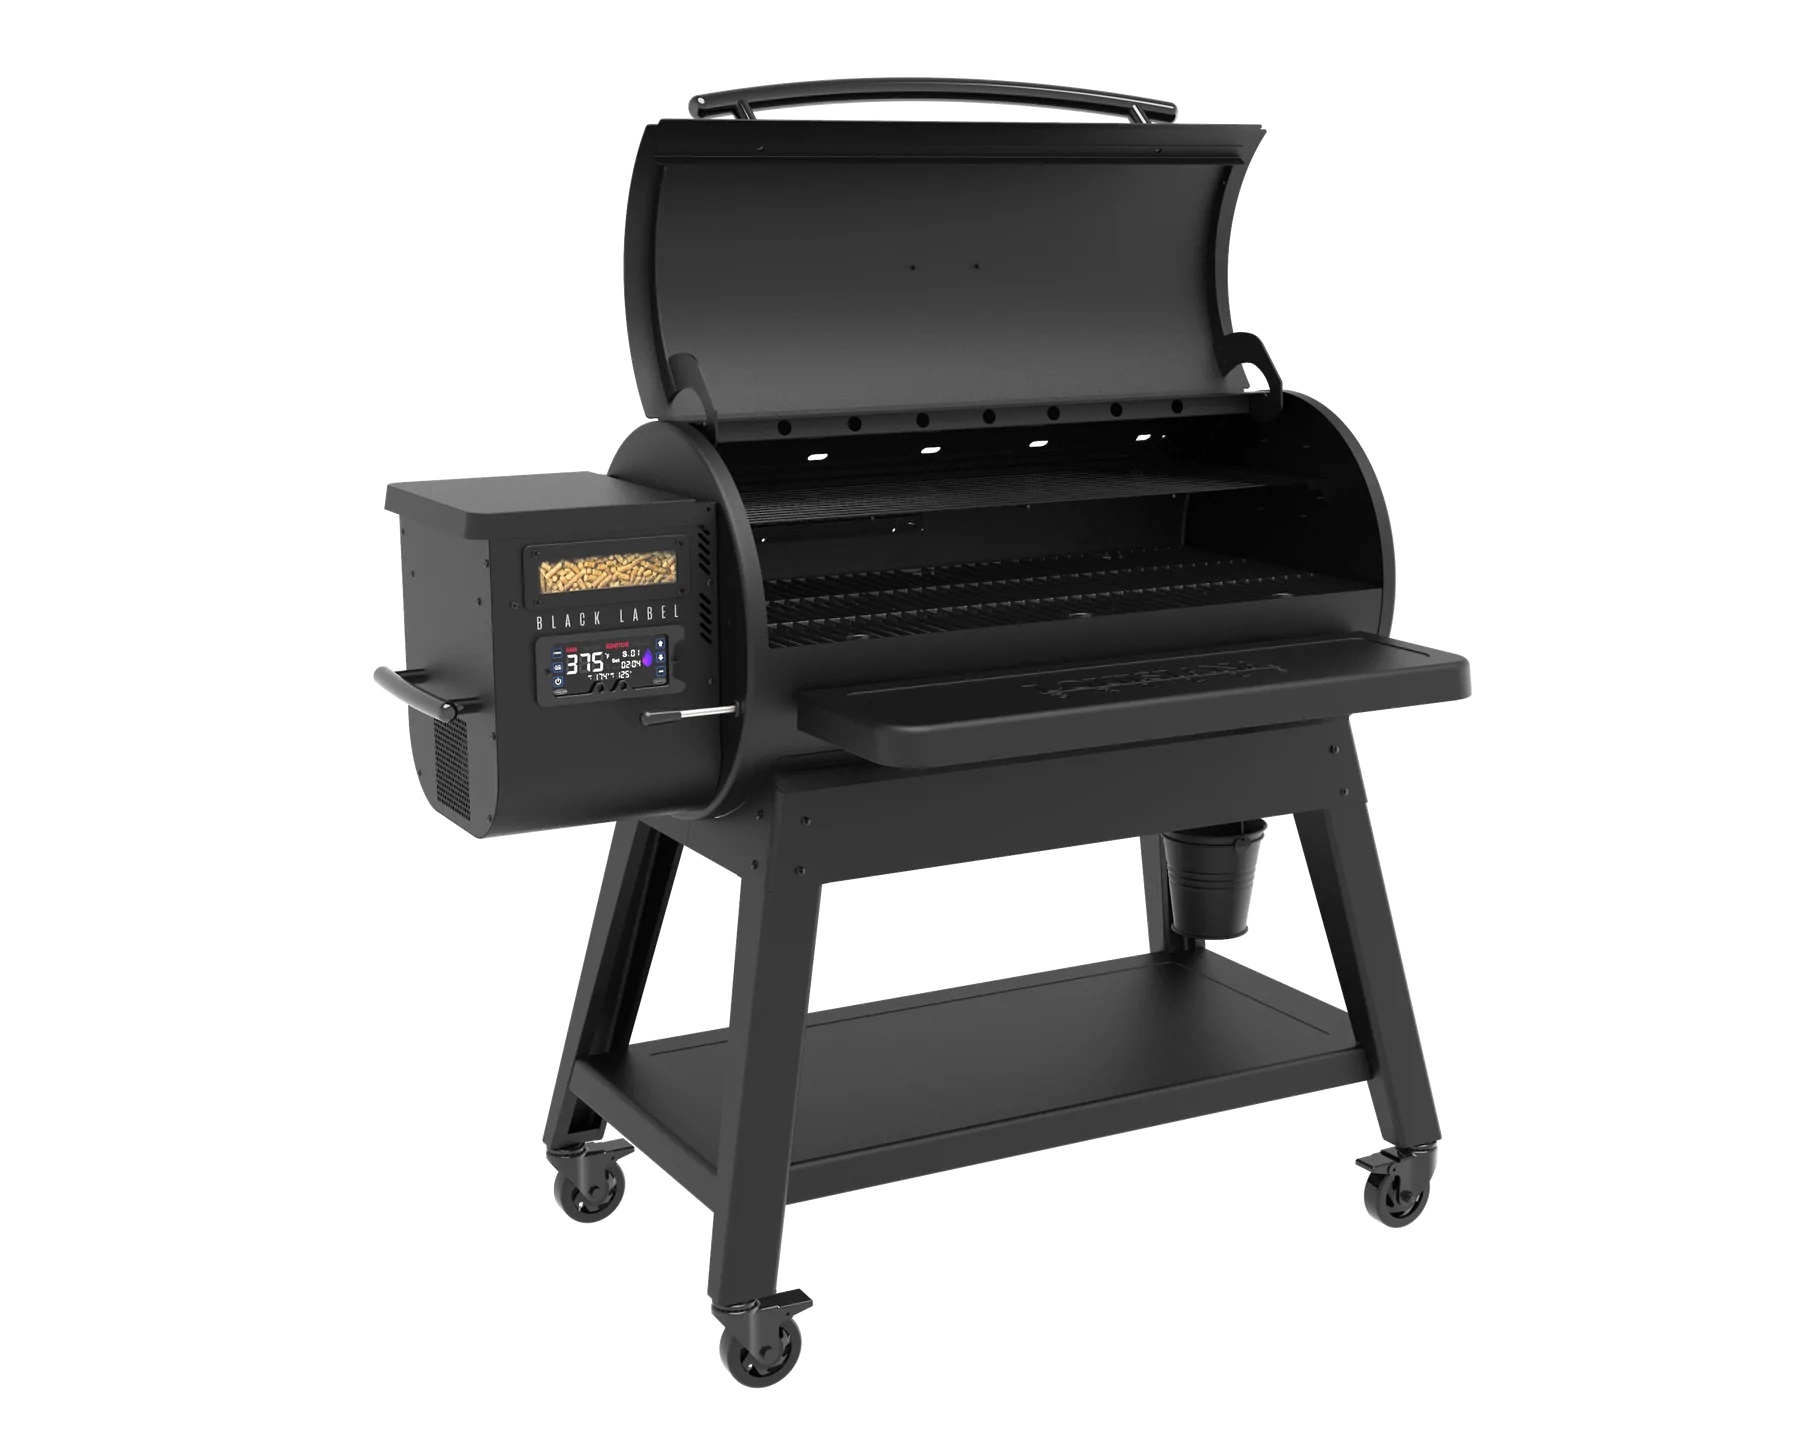 louisiana grills black label 1200 grill with wifi contol thumbnail image